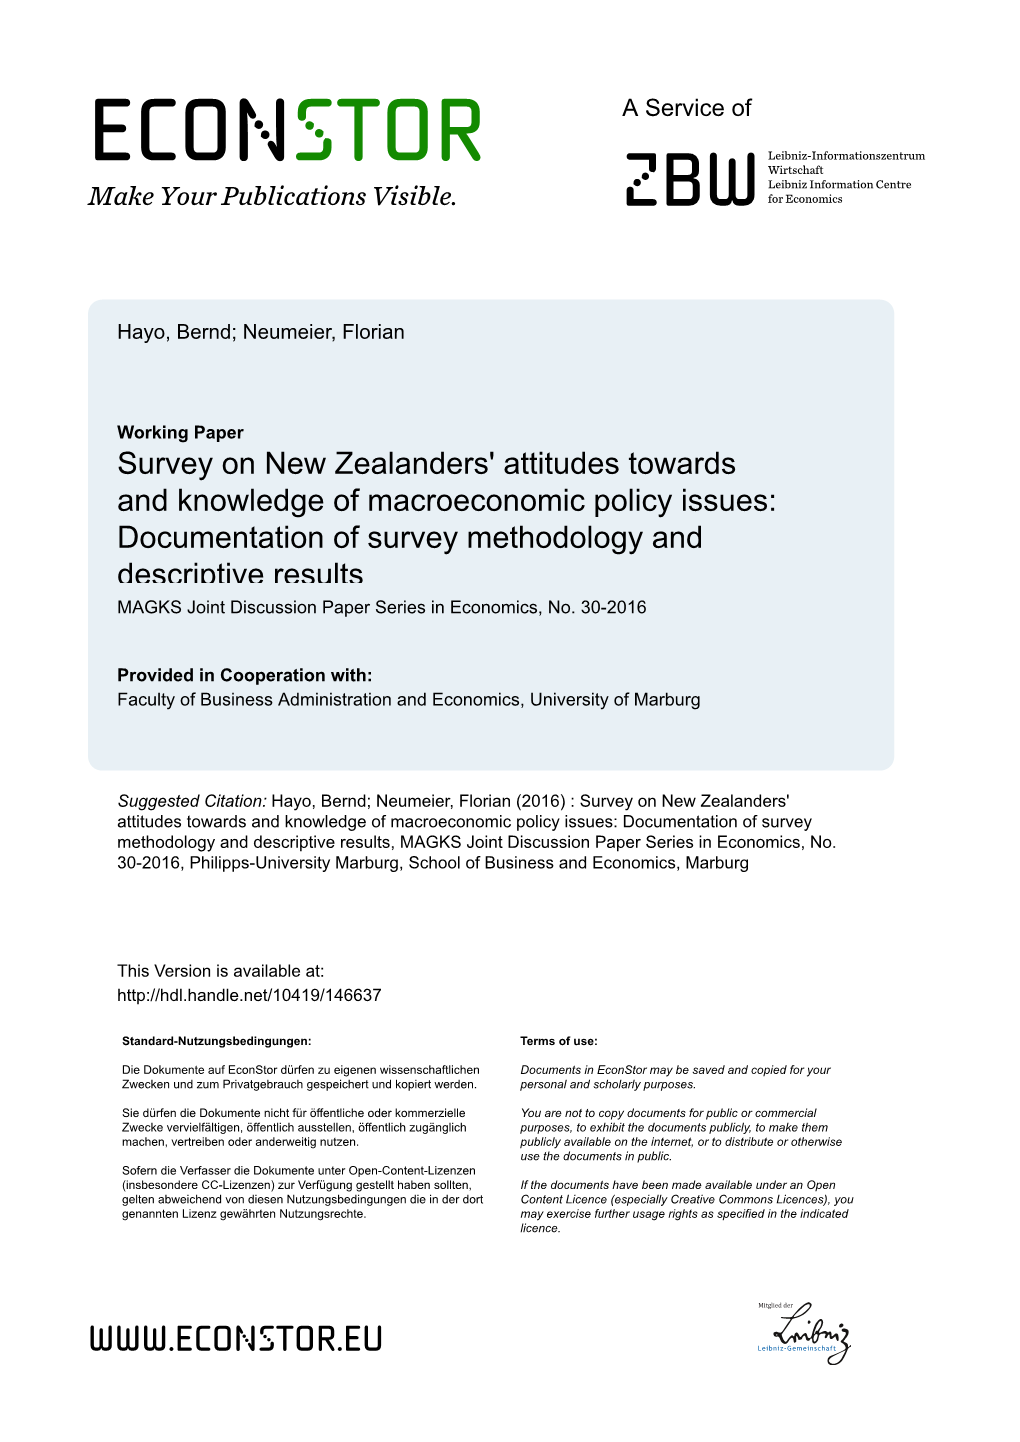 Documentation of Survey Methodology and Descriptive Results MAGKS Joint Discussion Paper Series in Economics, No